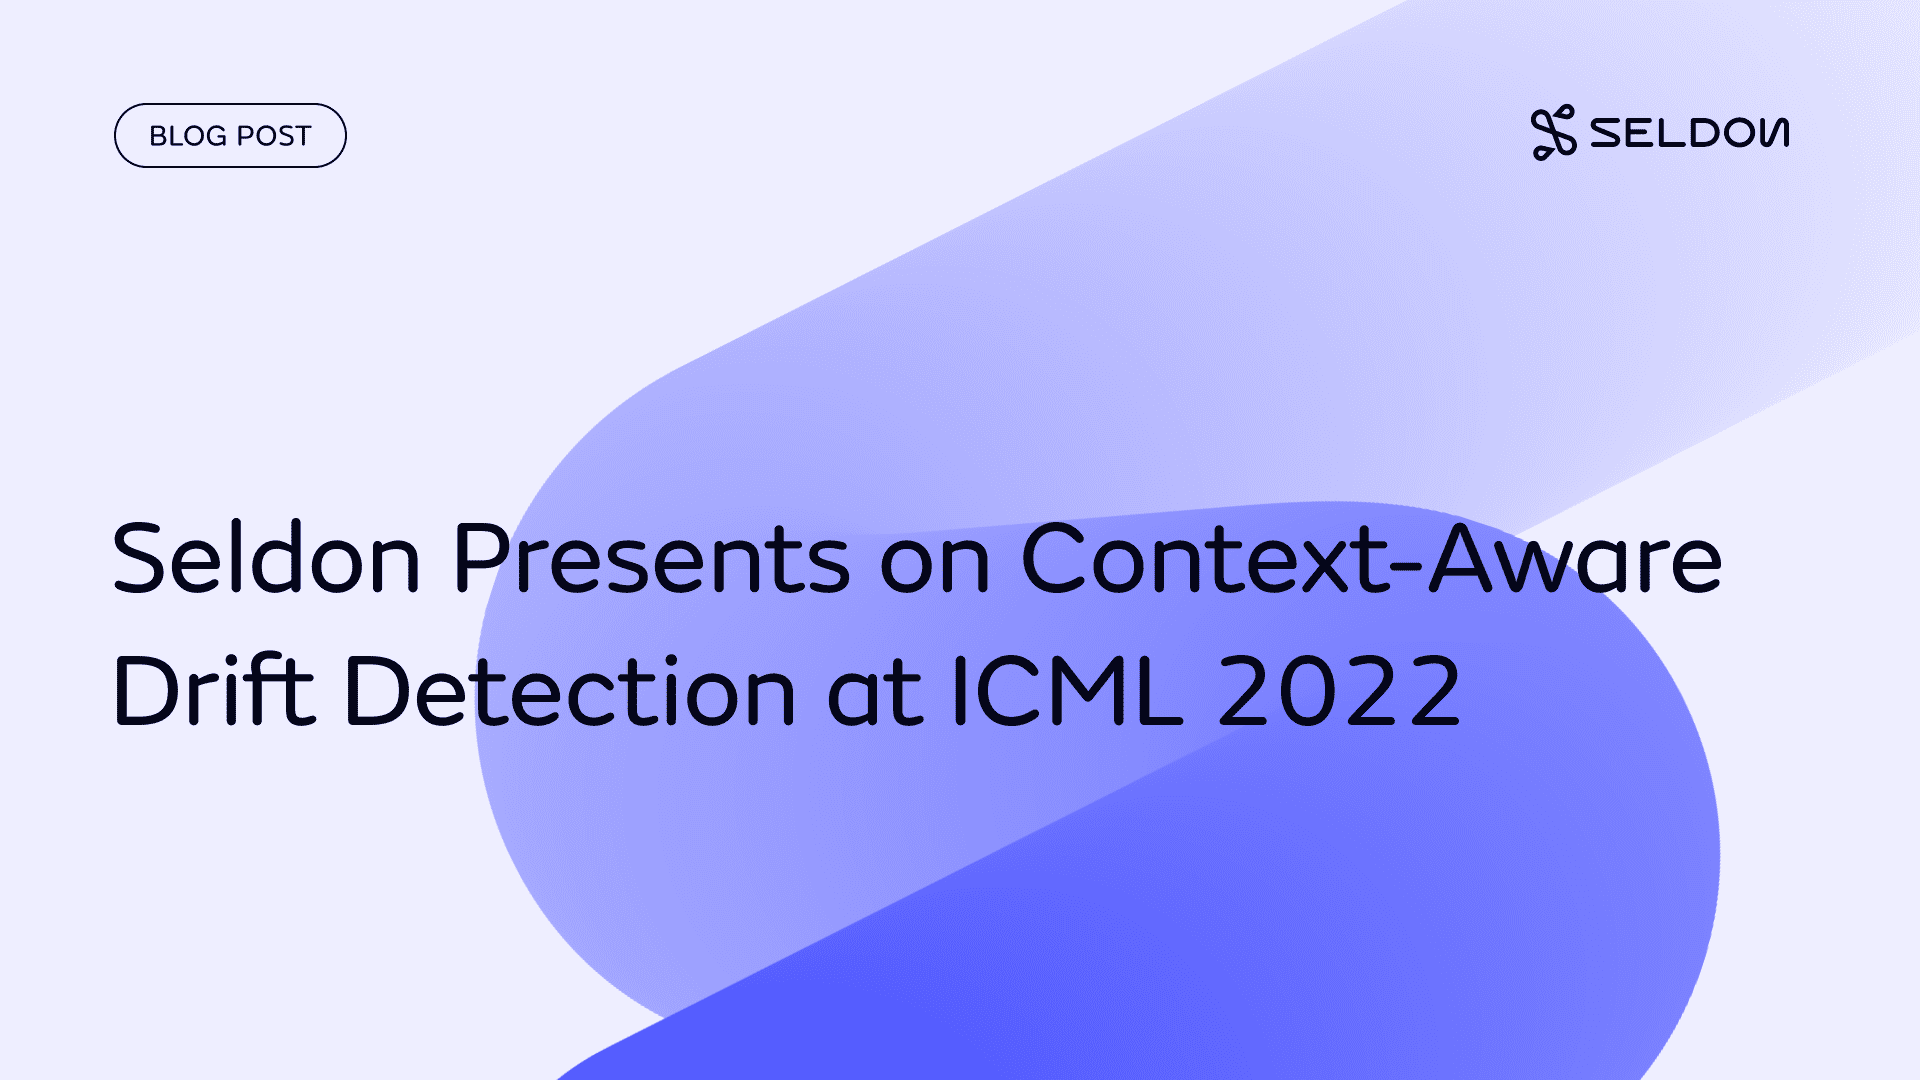 Seldon Presents on Context-Aware Drift Detection at ICML 2022